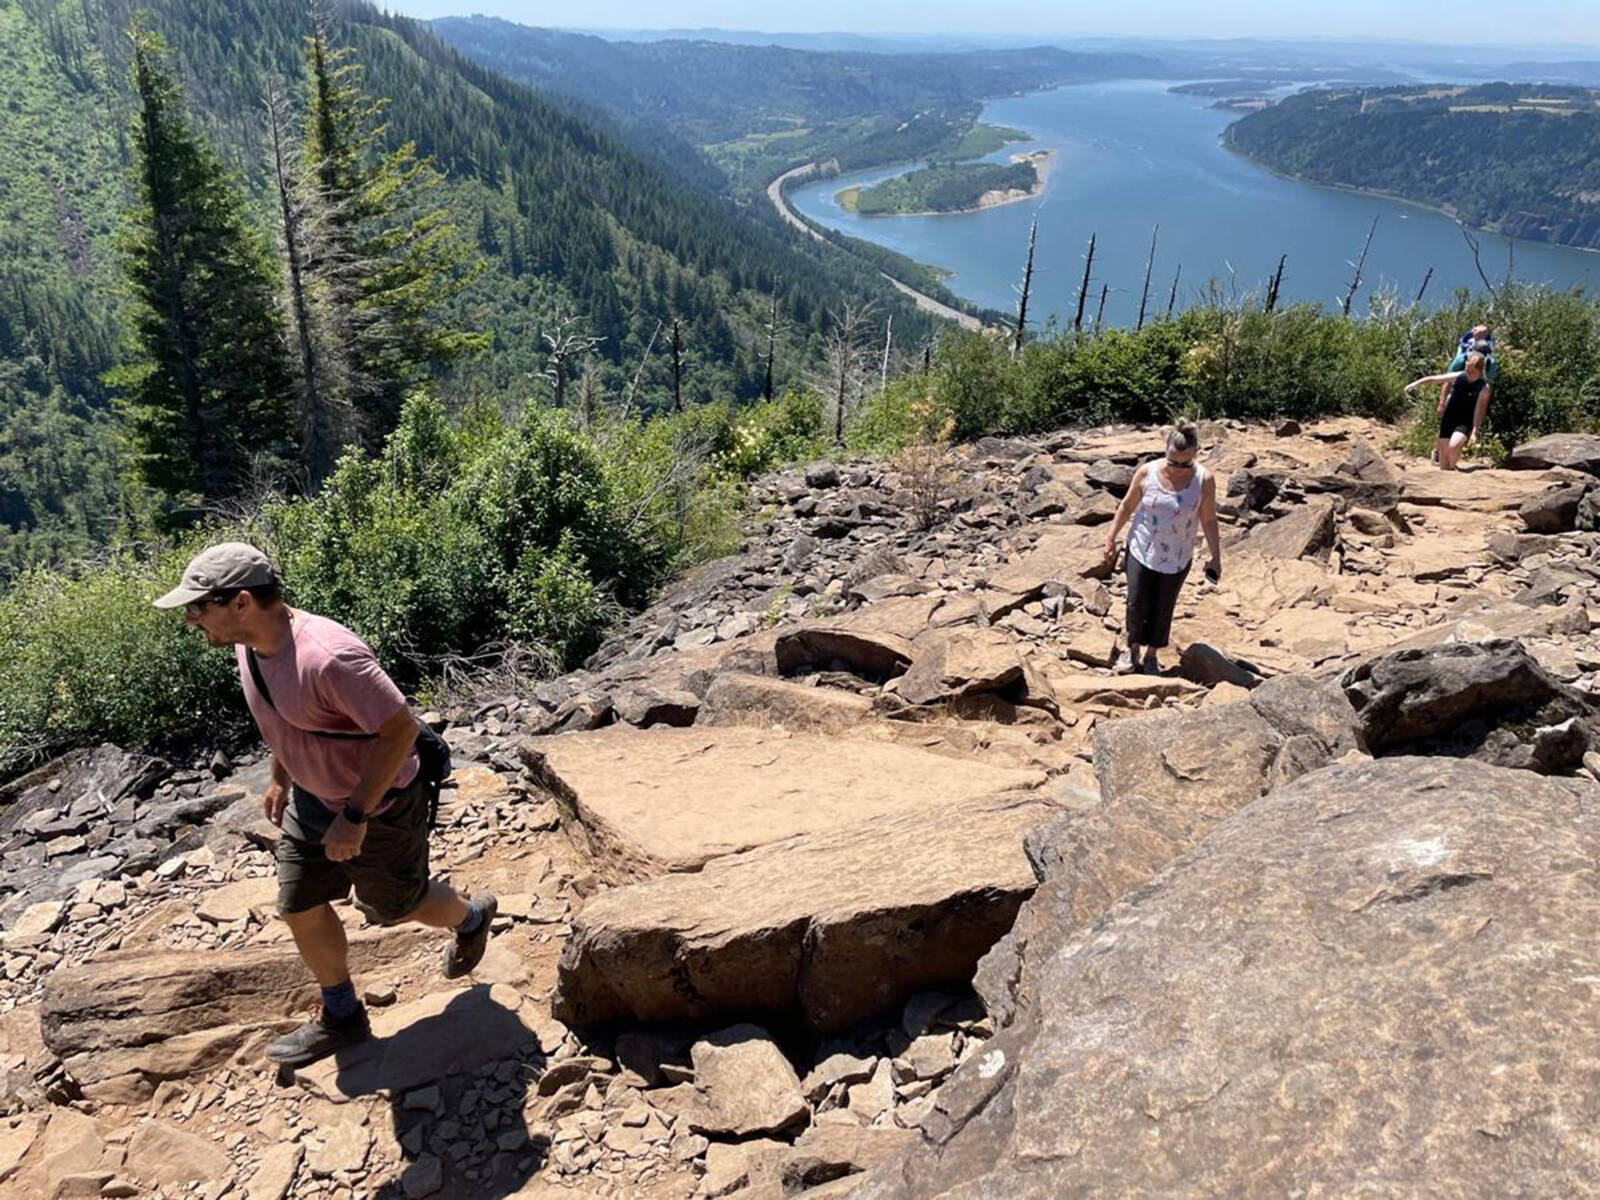 Mark Morical | The Bend Bulletin | TNS | File Photo
Tony Barnes and Cindy Morical, both of Vancouver, Washington, hike along the Angel’s Rest Trail in the Columbia River Gorge on July 5, 2021.